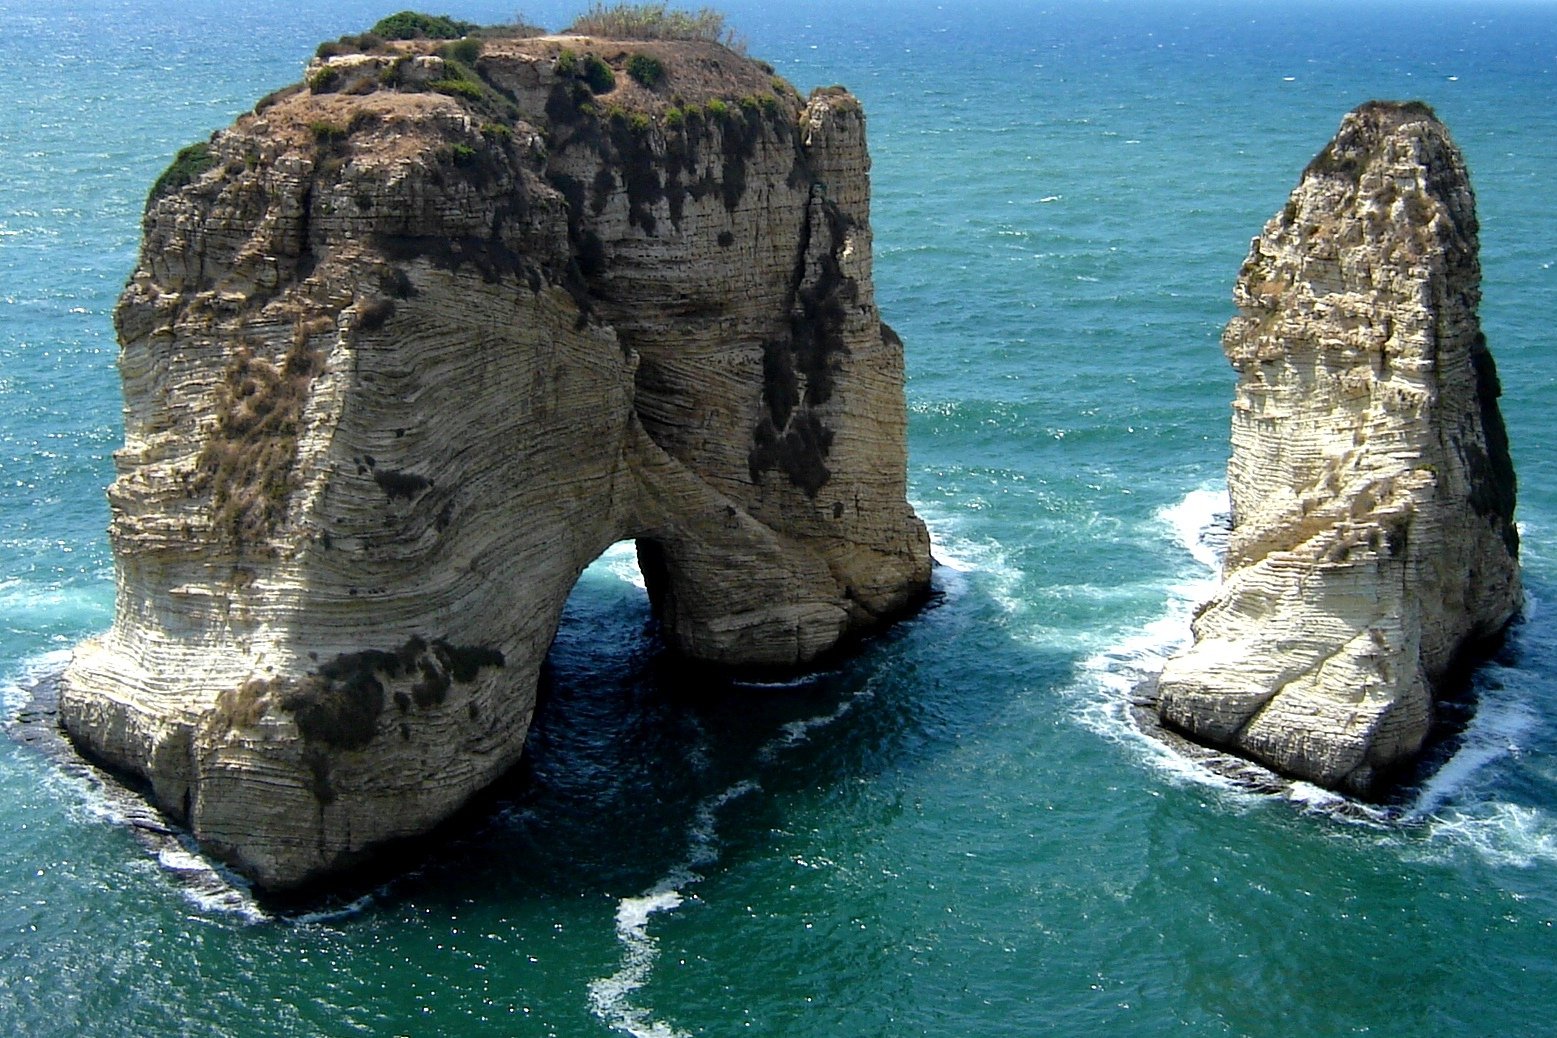 there is a rock formation in the middle of the ocean